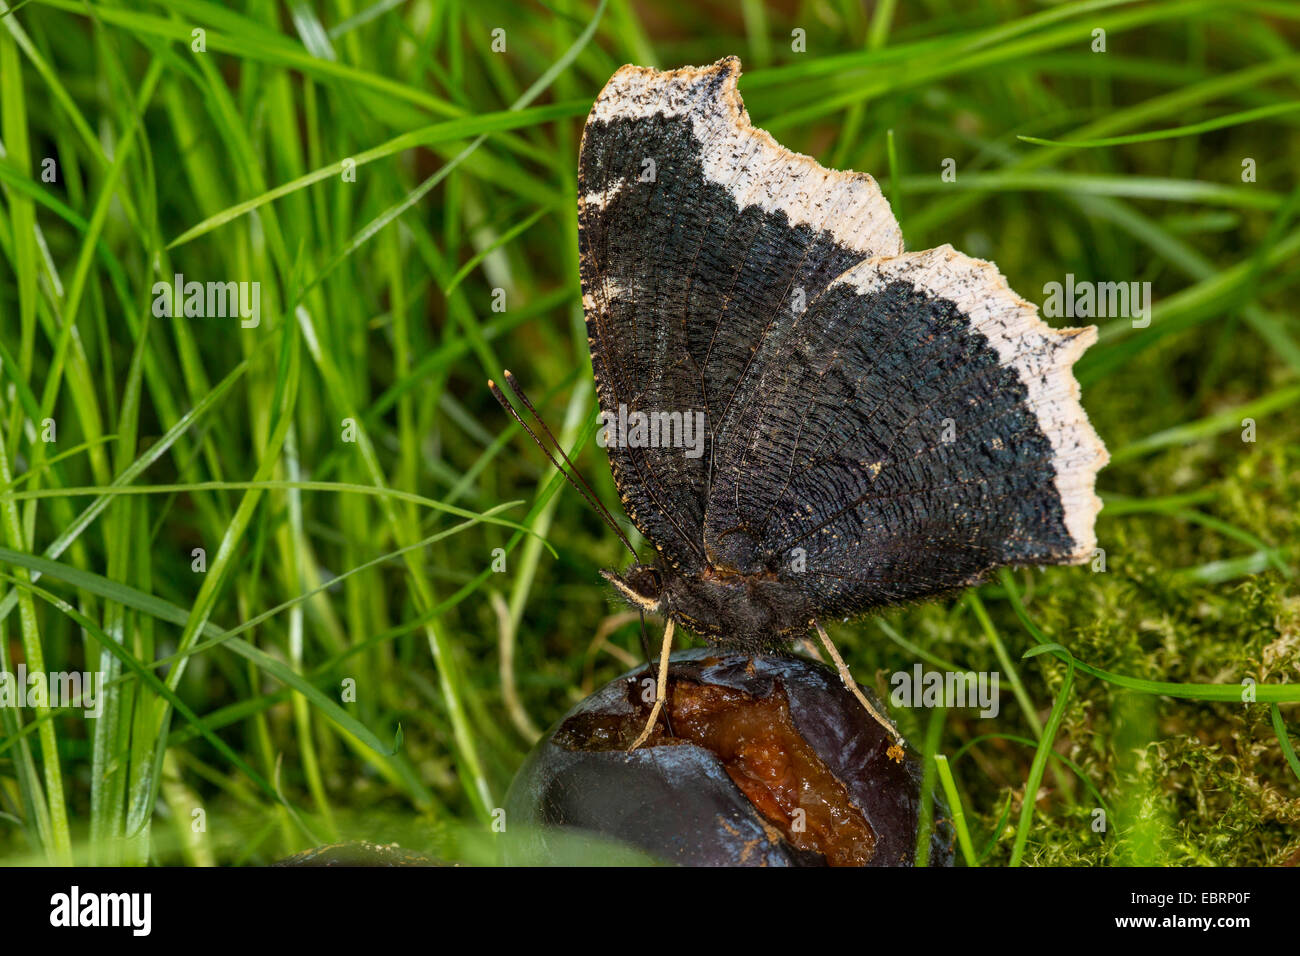 Camberwell beauty (Nymphalis antiopa), feeds on a fallen and bursted plum, Germany Stock Photo